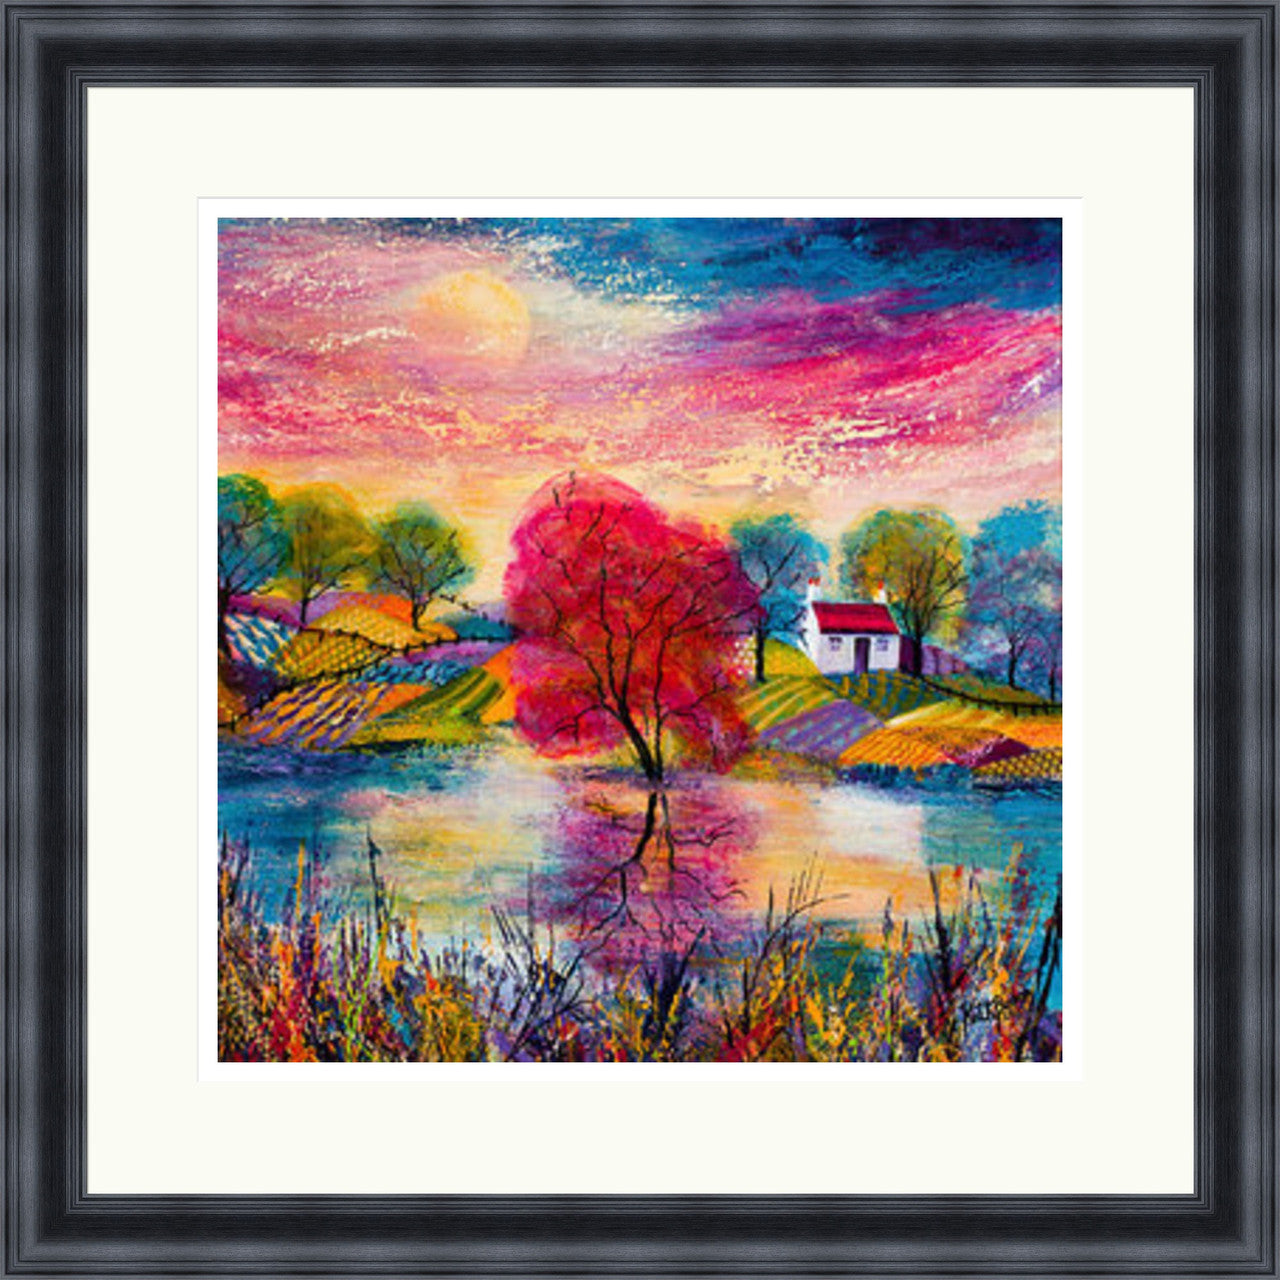 Reflections (Limited Edition) by Kathleen Buchan